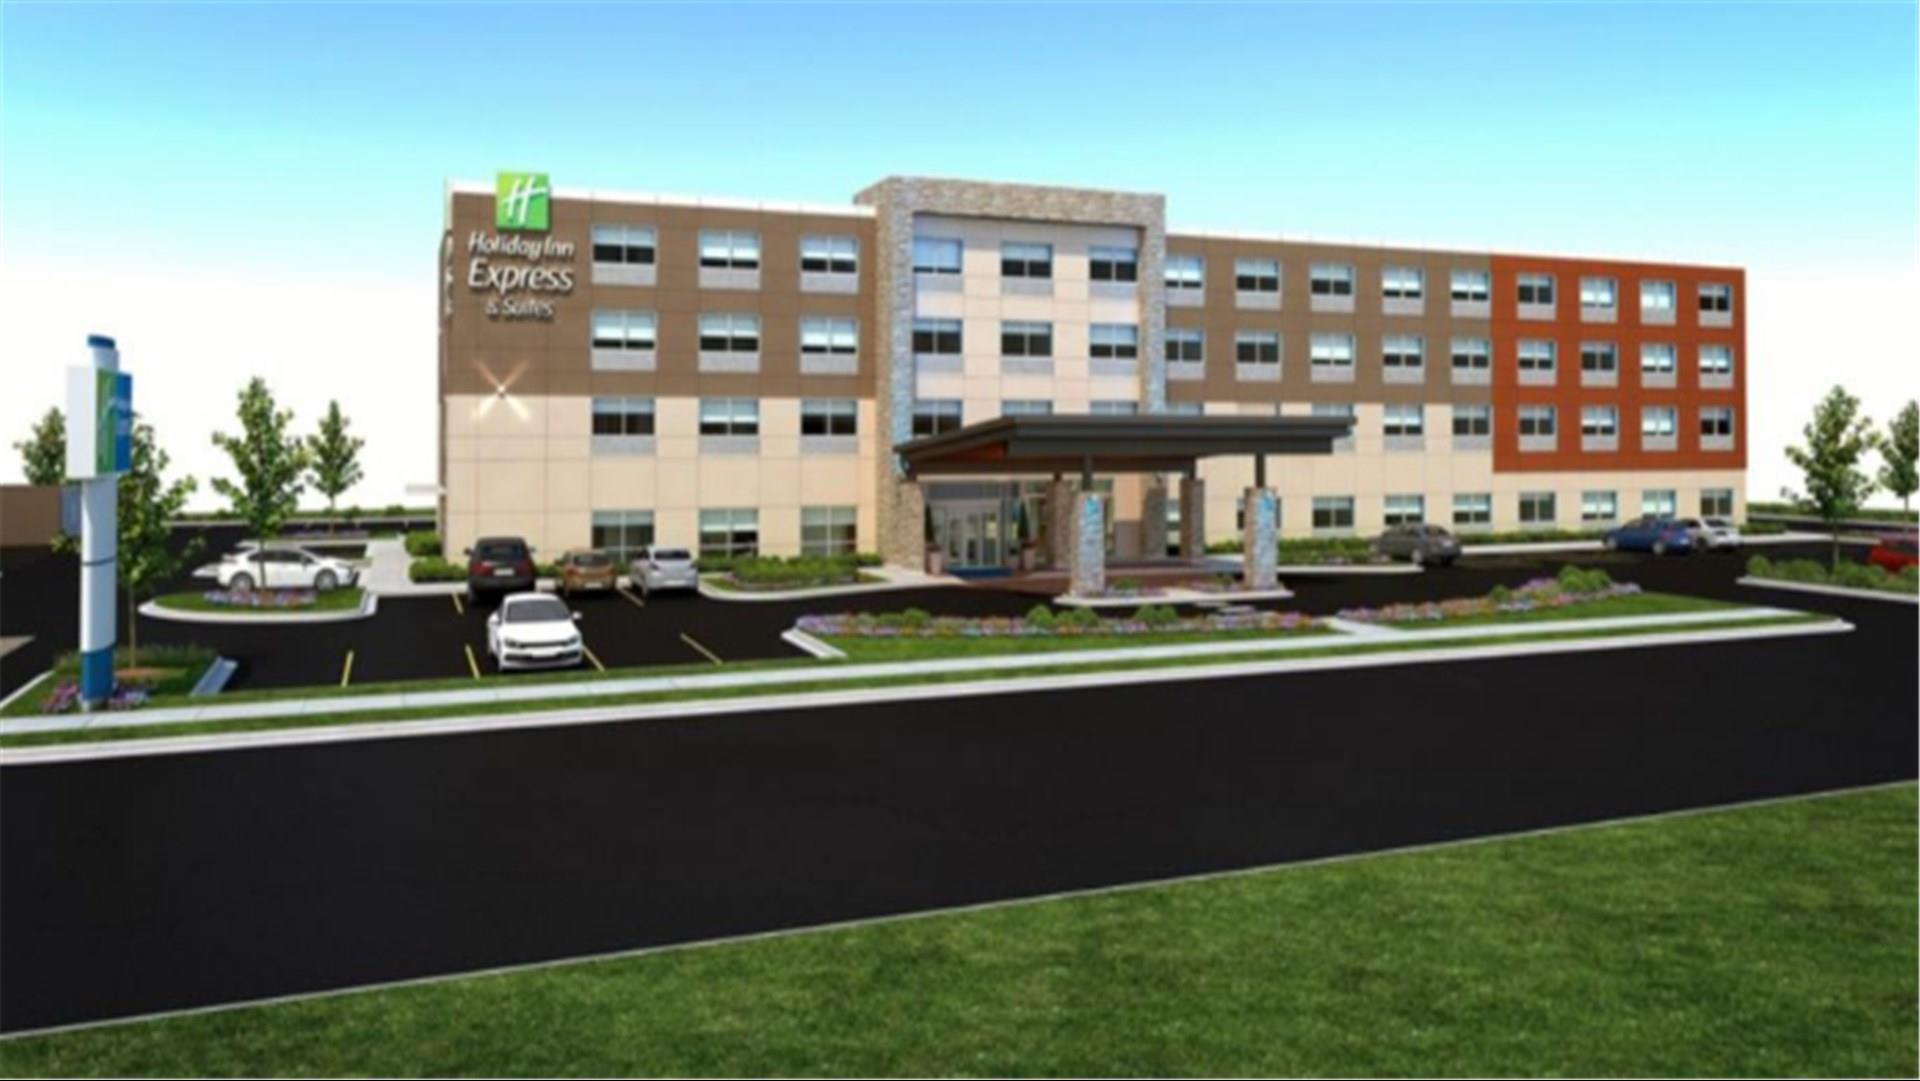 Holiday Inn Express & Suites Ithaca in Ithaca, NY